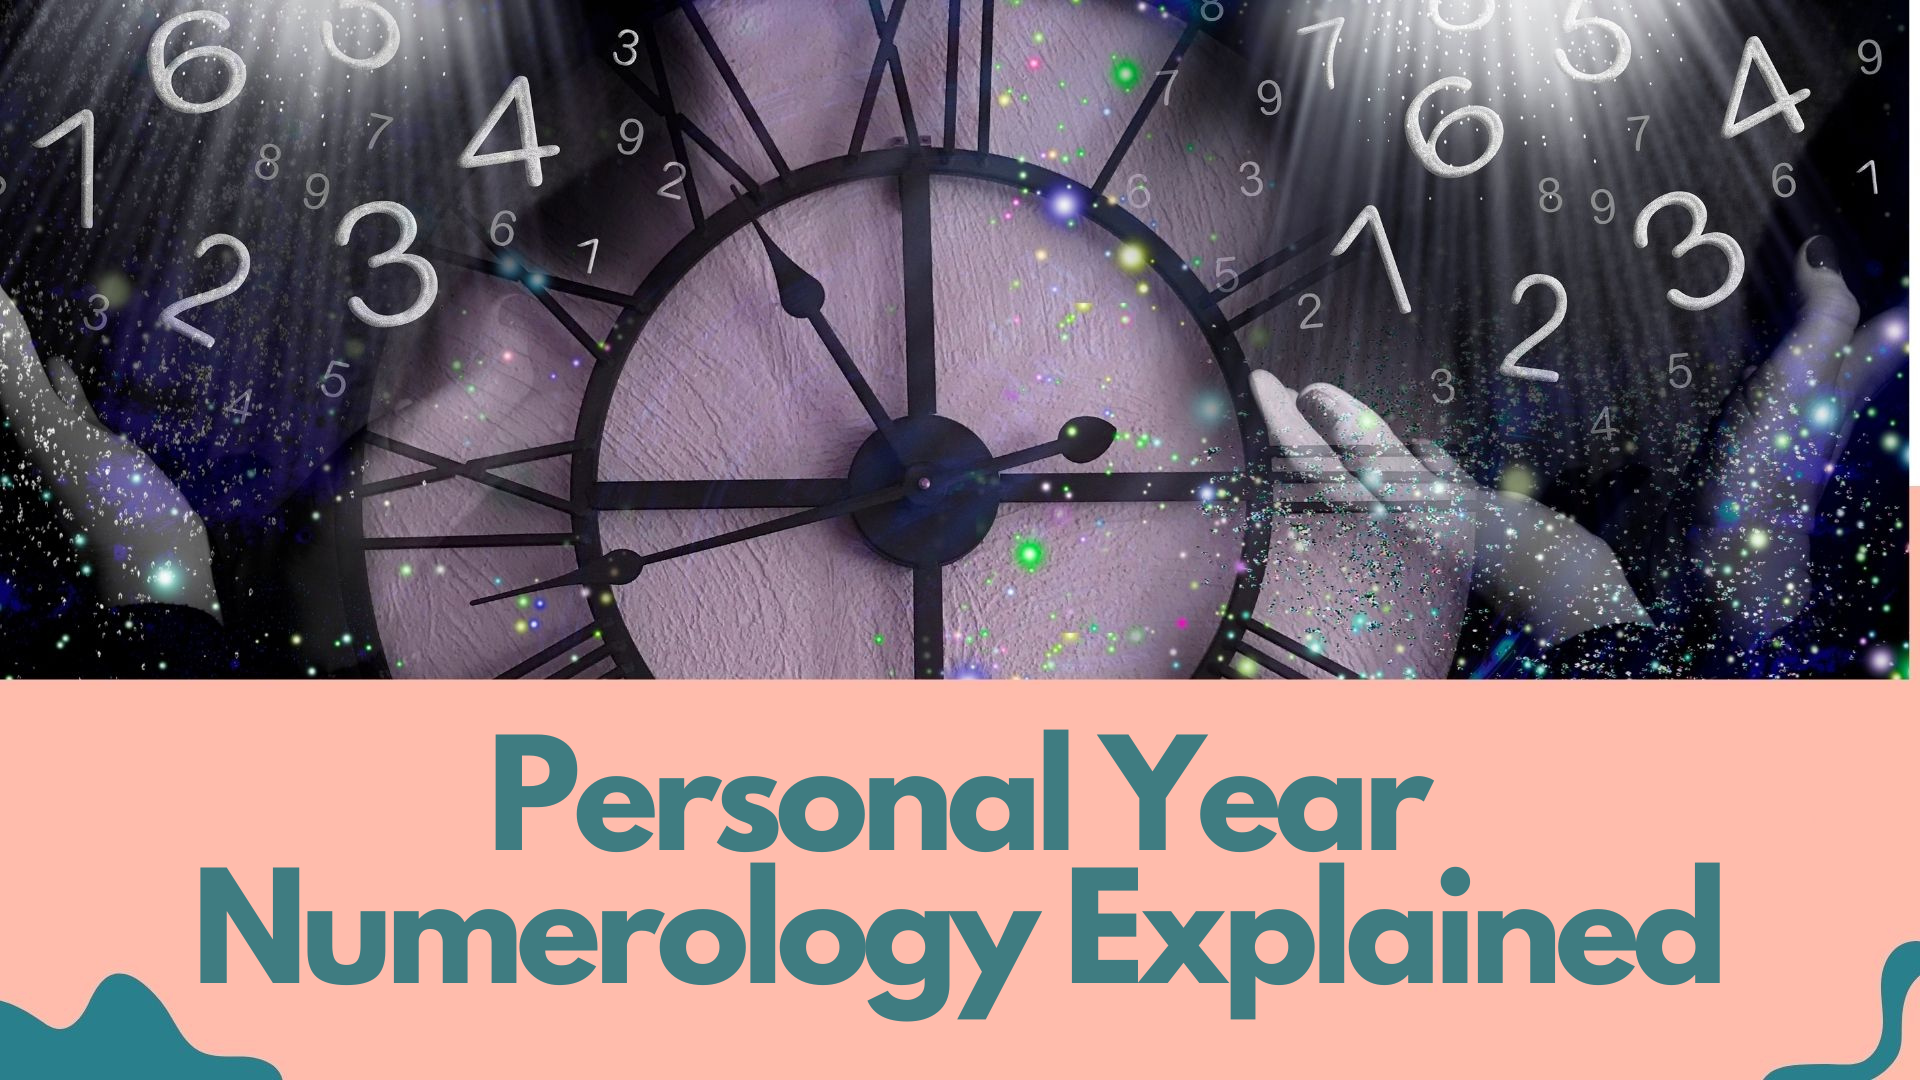 A clock with hands and numbers on the background with words Personal Year Numerology Explained